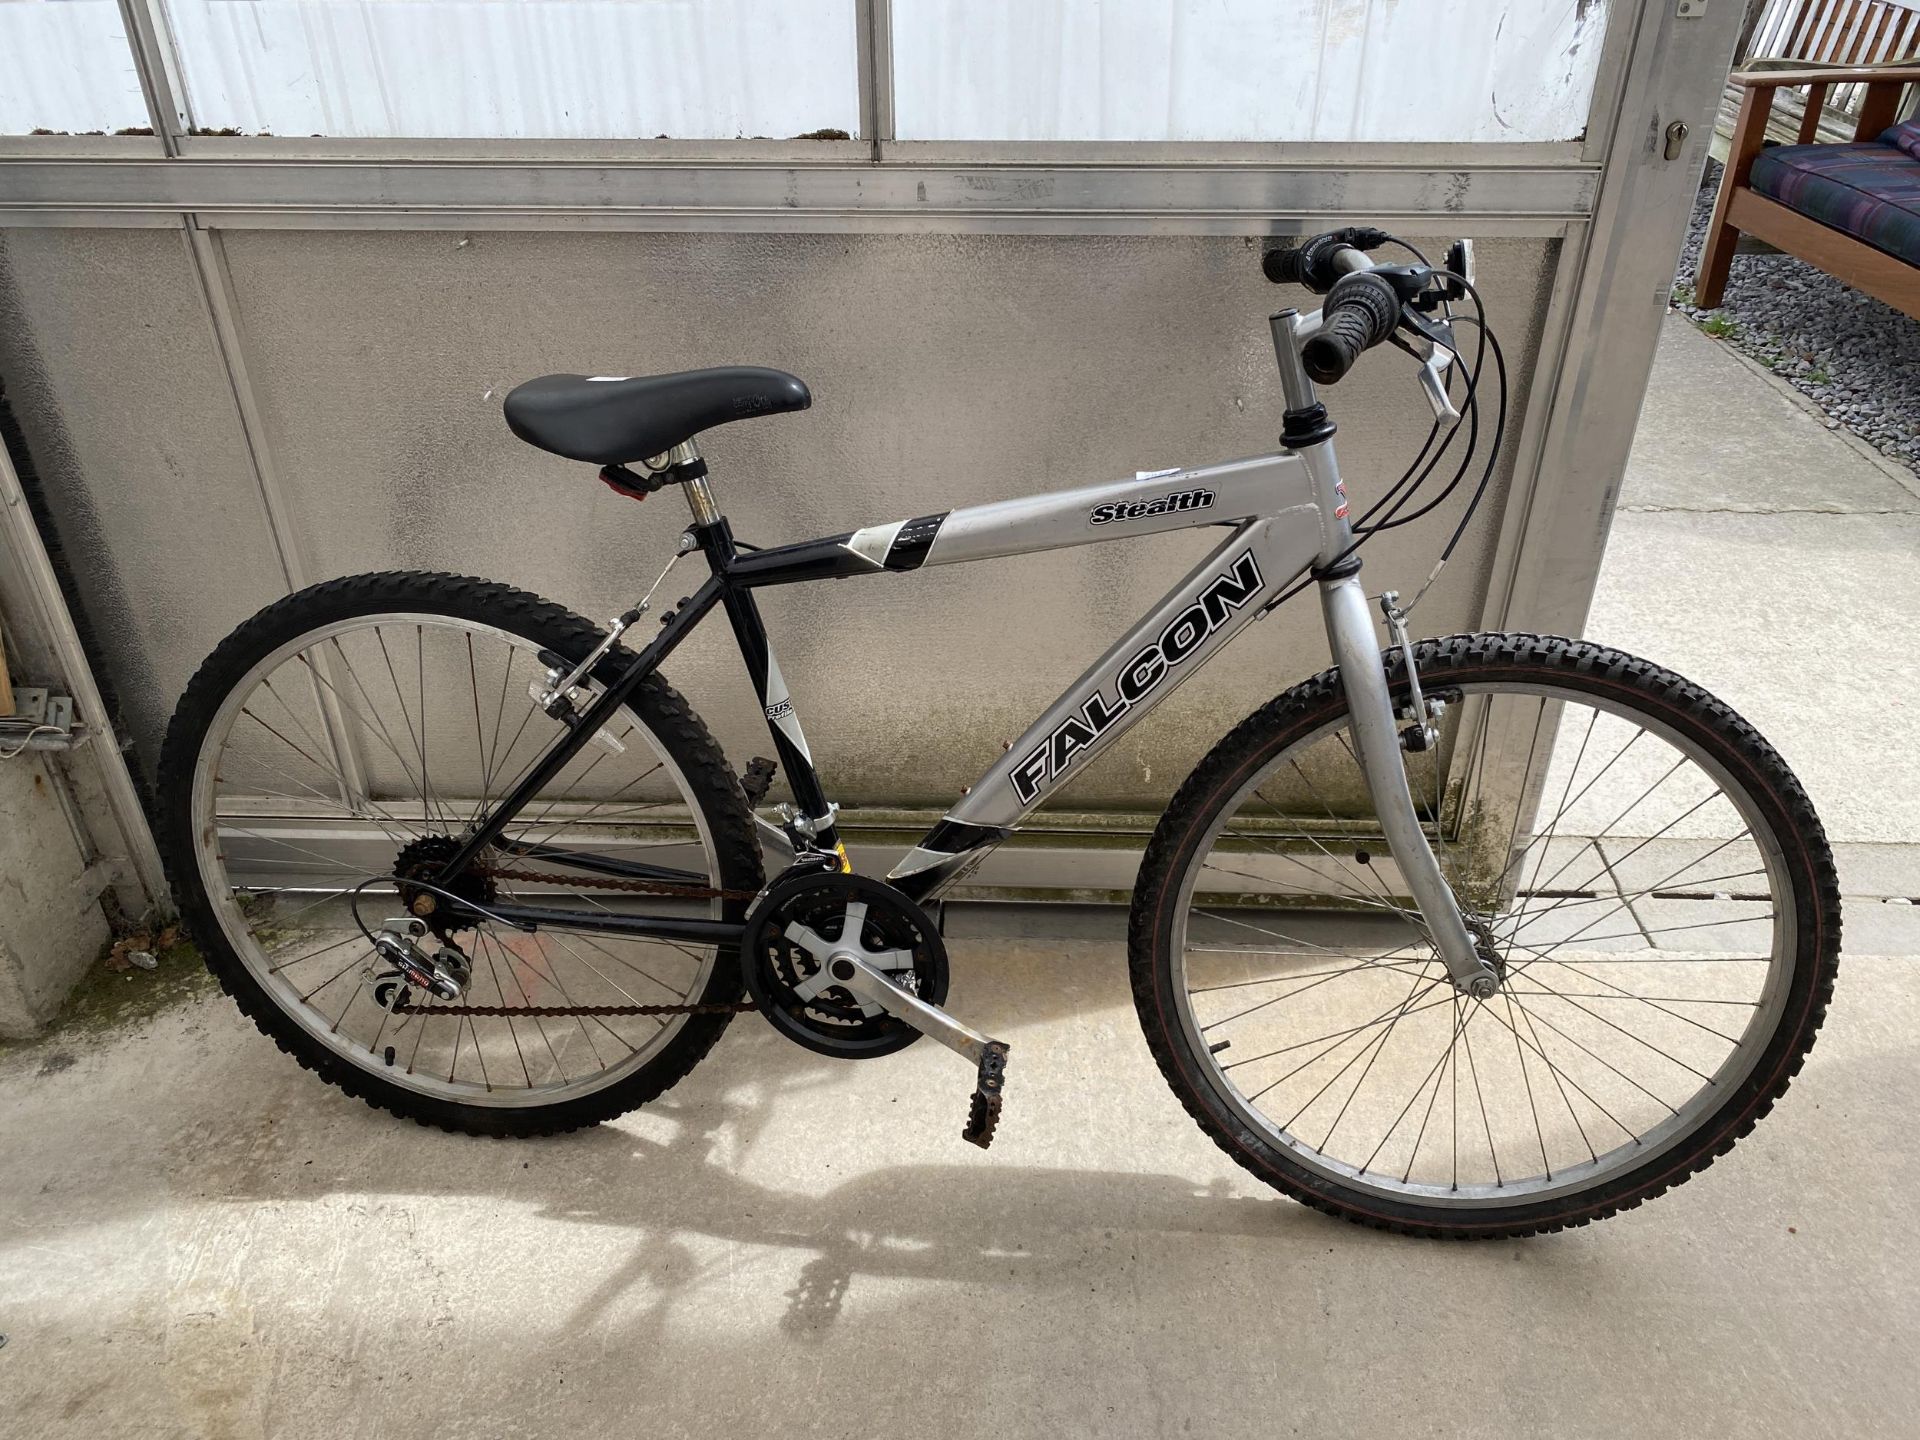 A GENTS FALCON MOUNTAIN BIKE WITH AN 18 GEAR SHIMANO SYSTEM